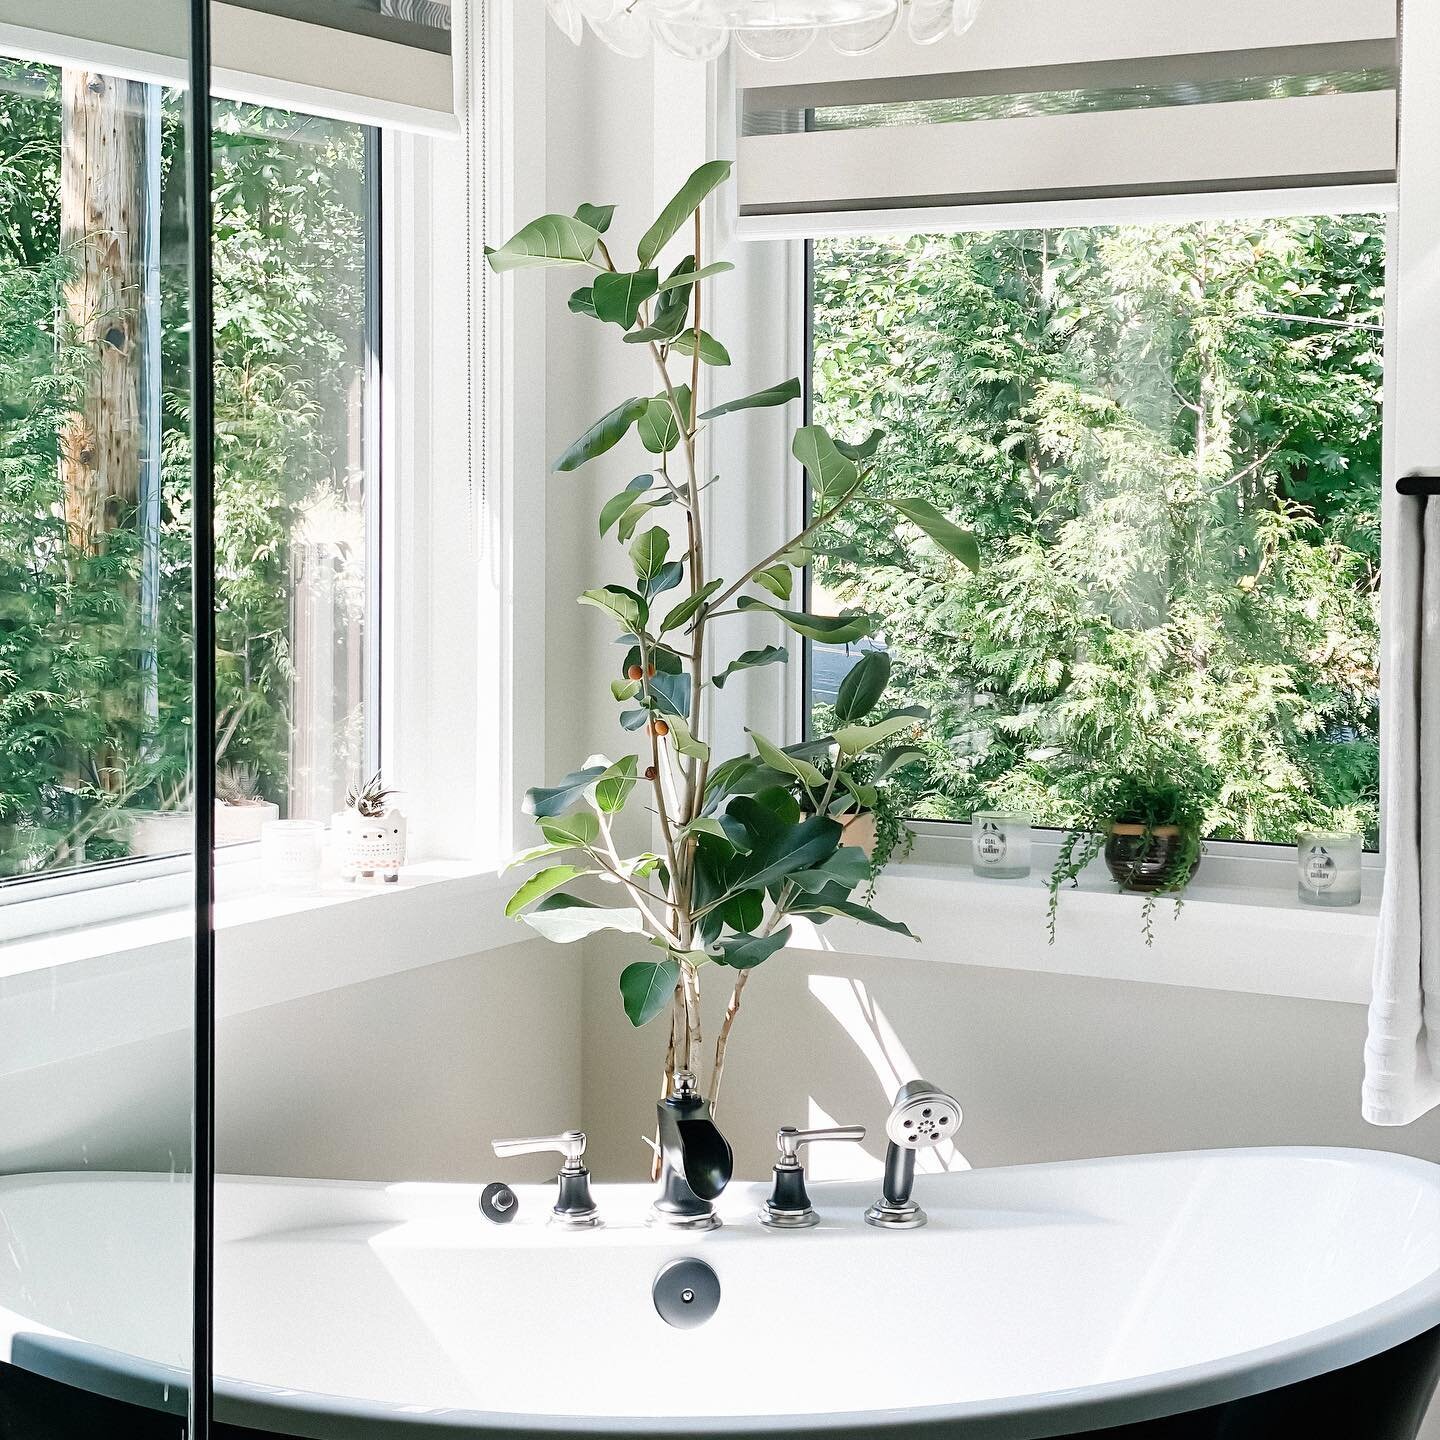 // ESCAPE // Nothing like bringing a little greenery indoors to create a dreamy escape within your space :: Still loving this ensuite setup in our clients home ✨

#interiordesign #interior #design #decor #sweet #escape #serene #ensuite #dreamy #agood